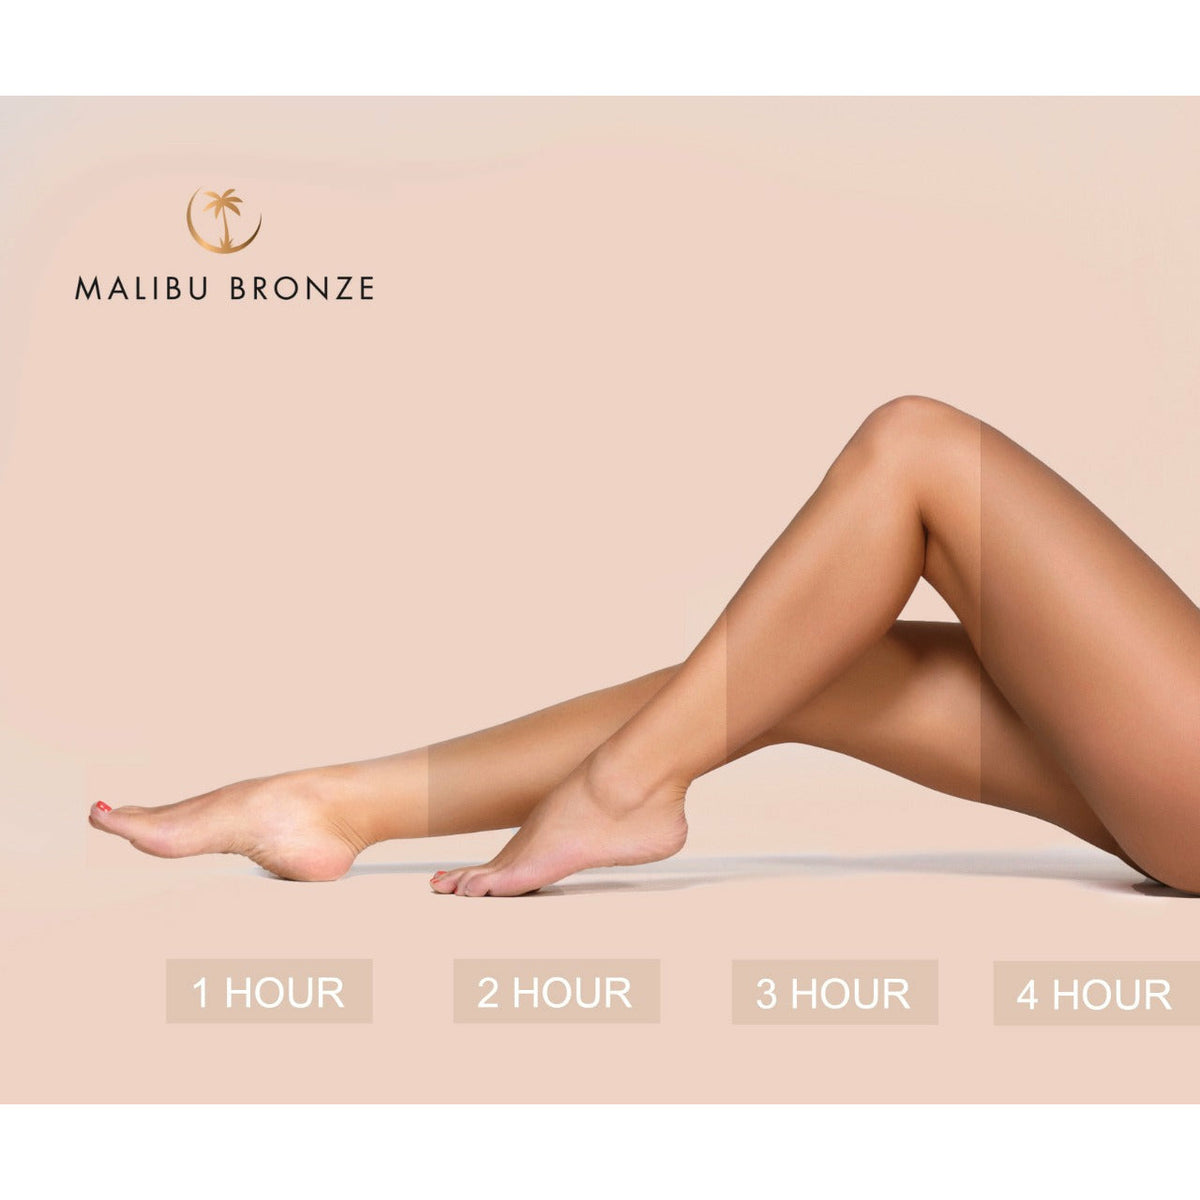 Color guide showing Malibu Bronze tan foam effect at the 1 hour, 2 hour, 3 hour, 4 hour mark.